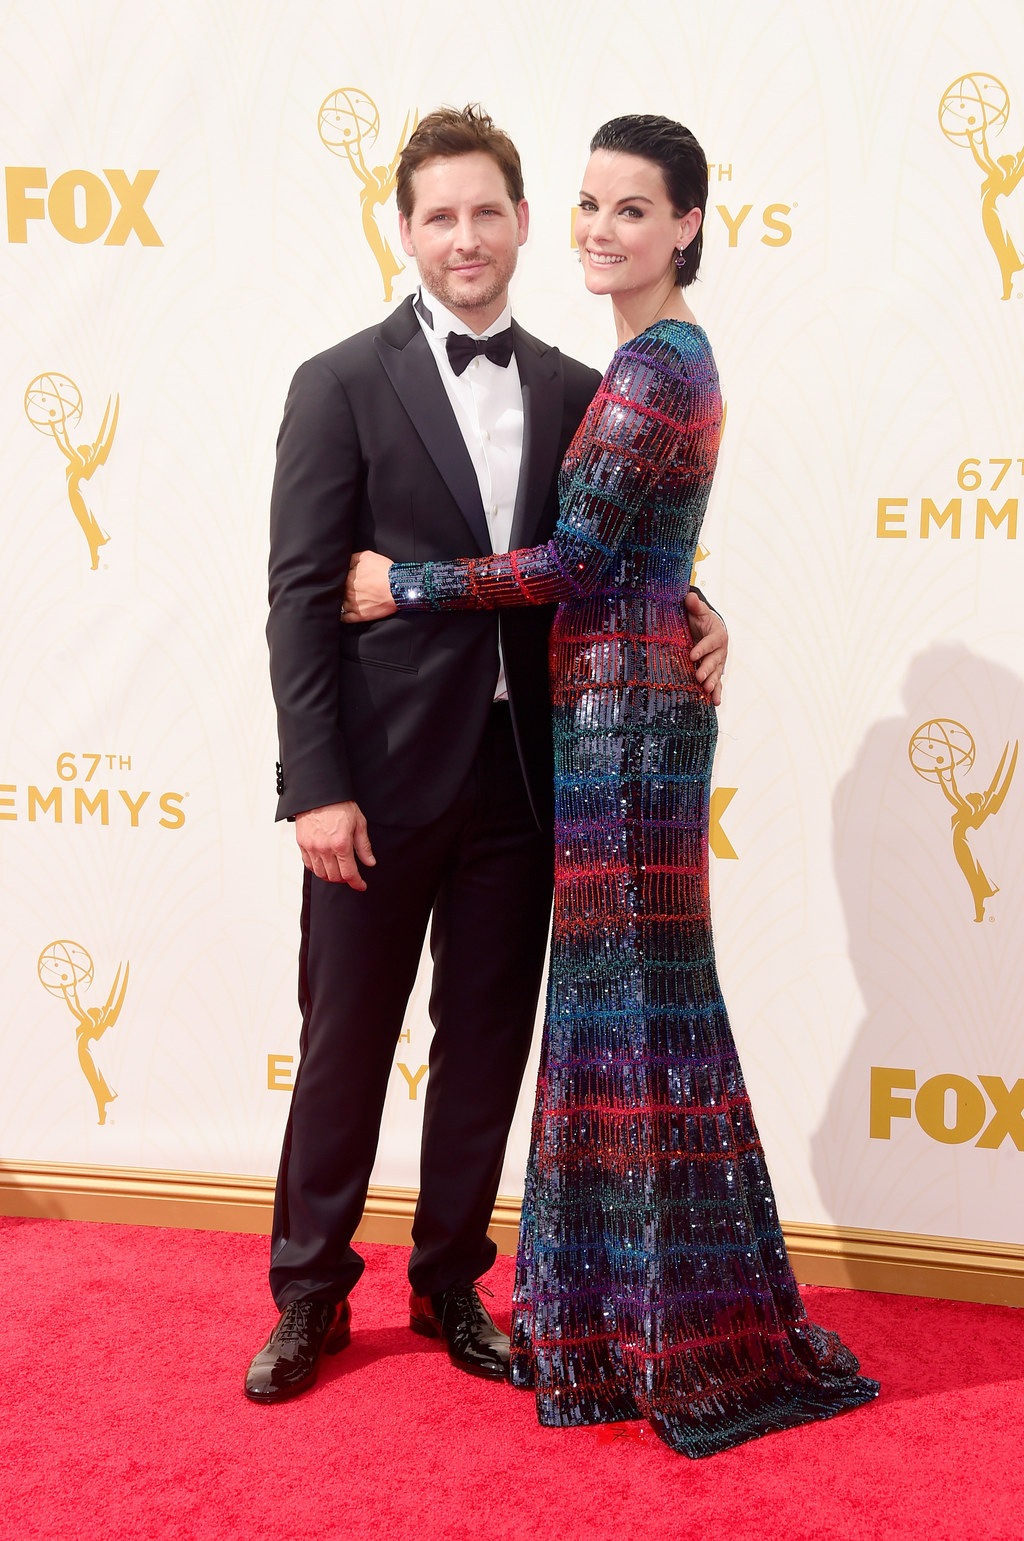 19 Adorably Cute Couples On The Emmys Red Carpet1024 x 1541